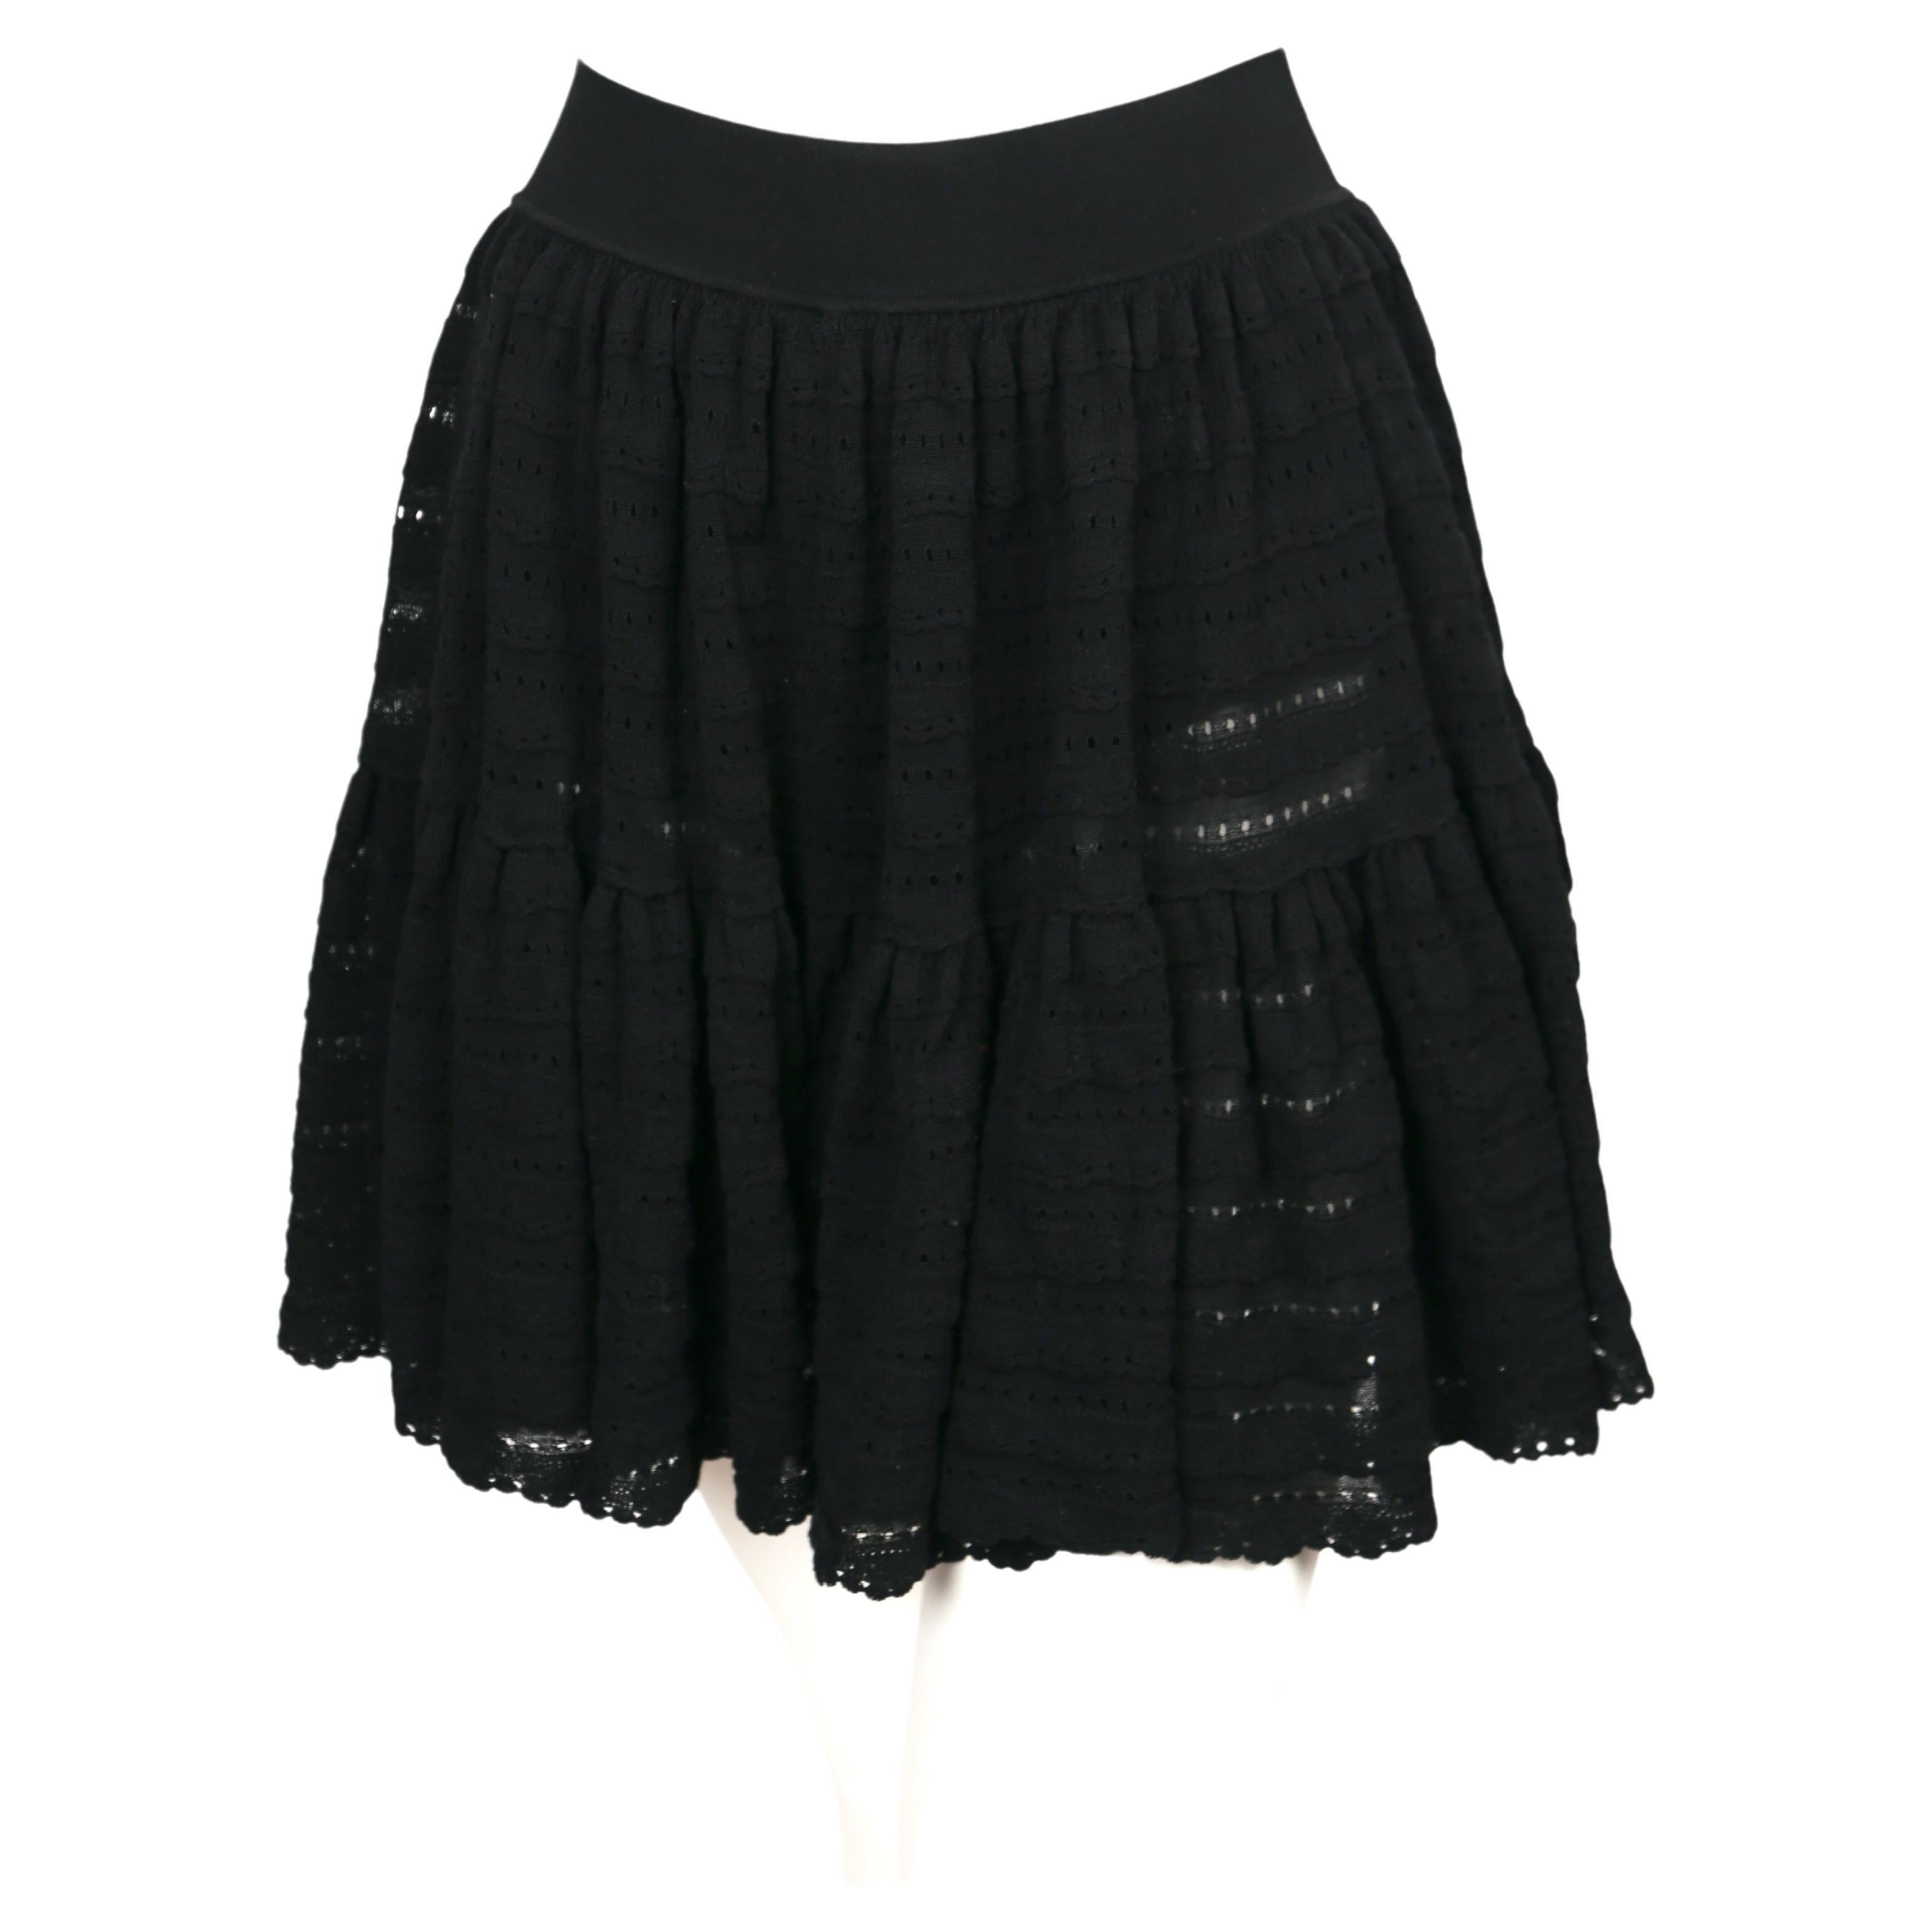 Black mini skirt with ruffled, open-work pointelle knit tiers and hidden shorts from Azzedine Alaia dating to the 2000's. Labeled a size 'XS'. Approximate measurements: waist 23